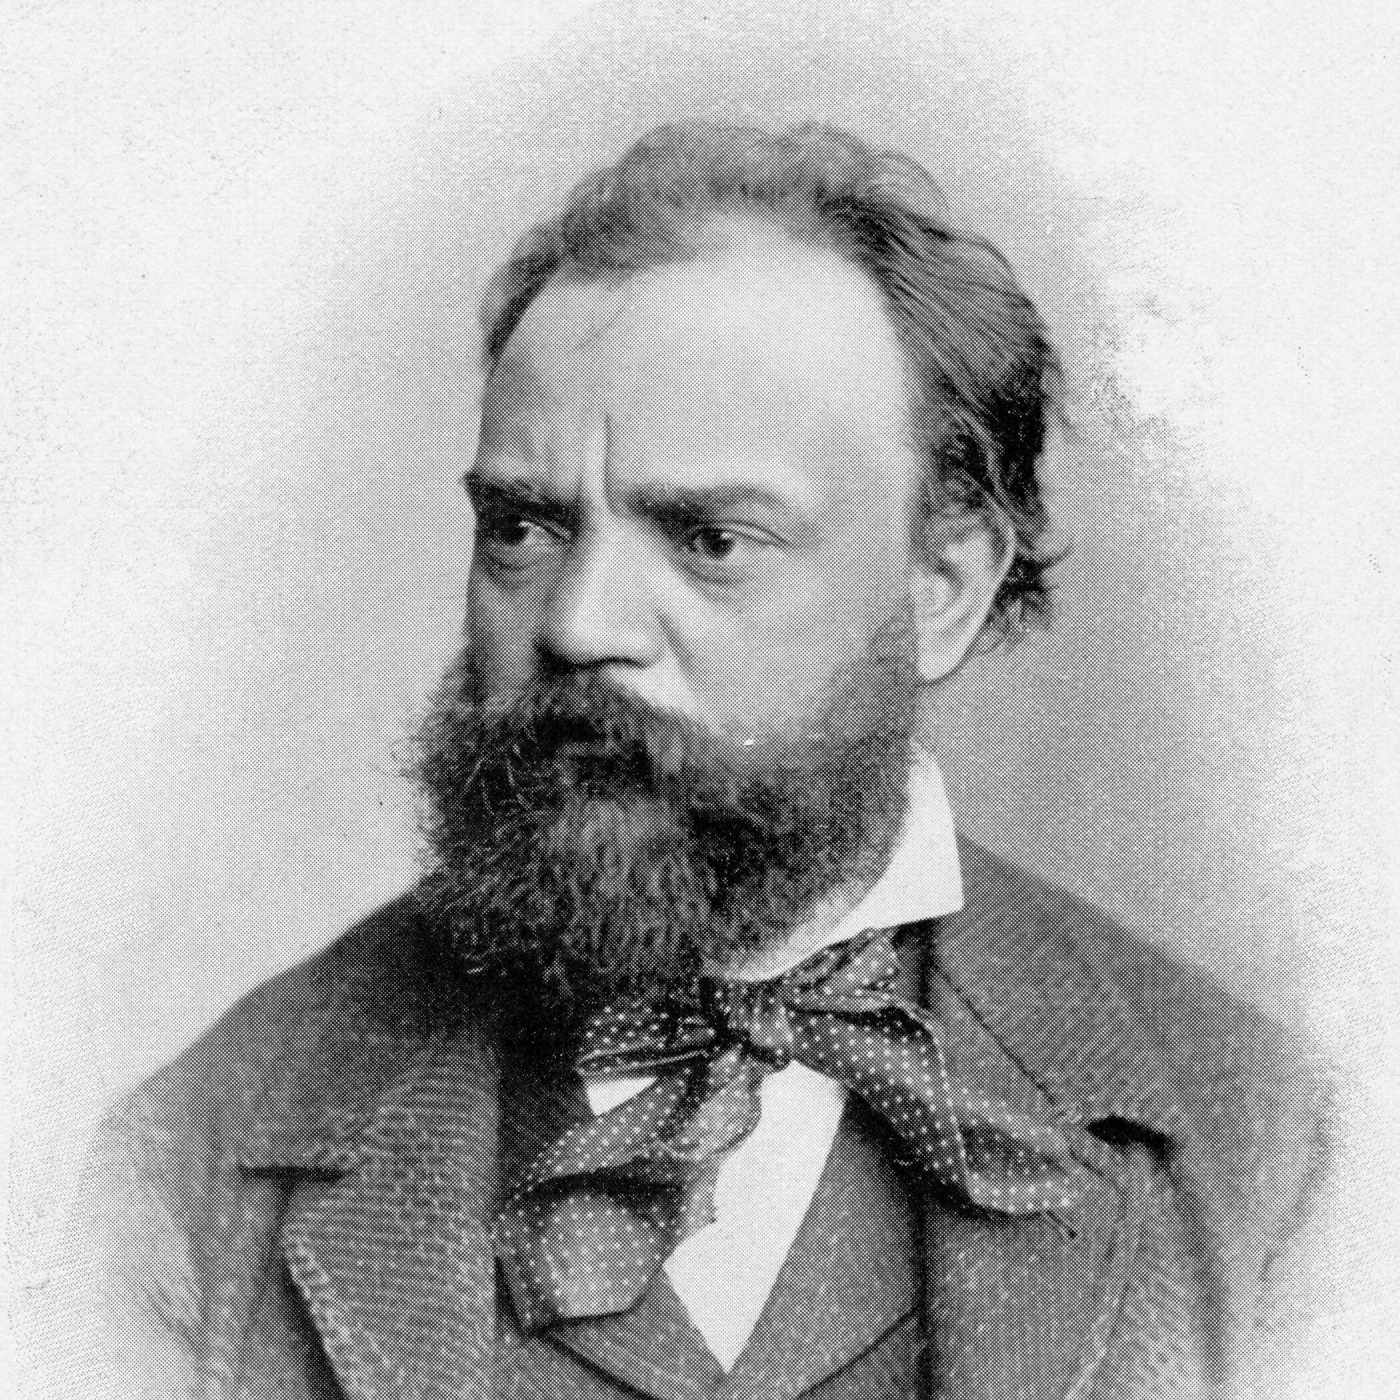 The life and music of Antonin Dvořák; from humble beginnings to stardom!